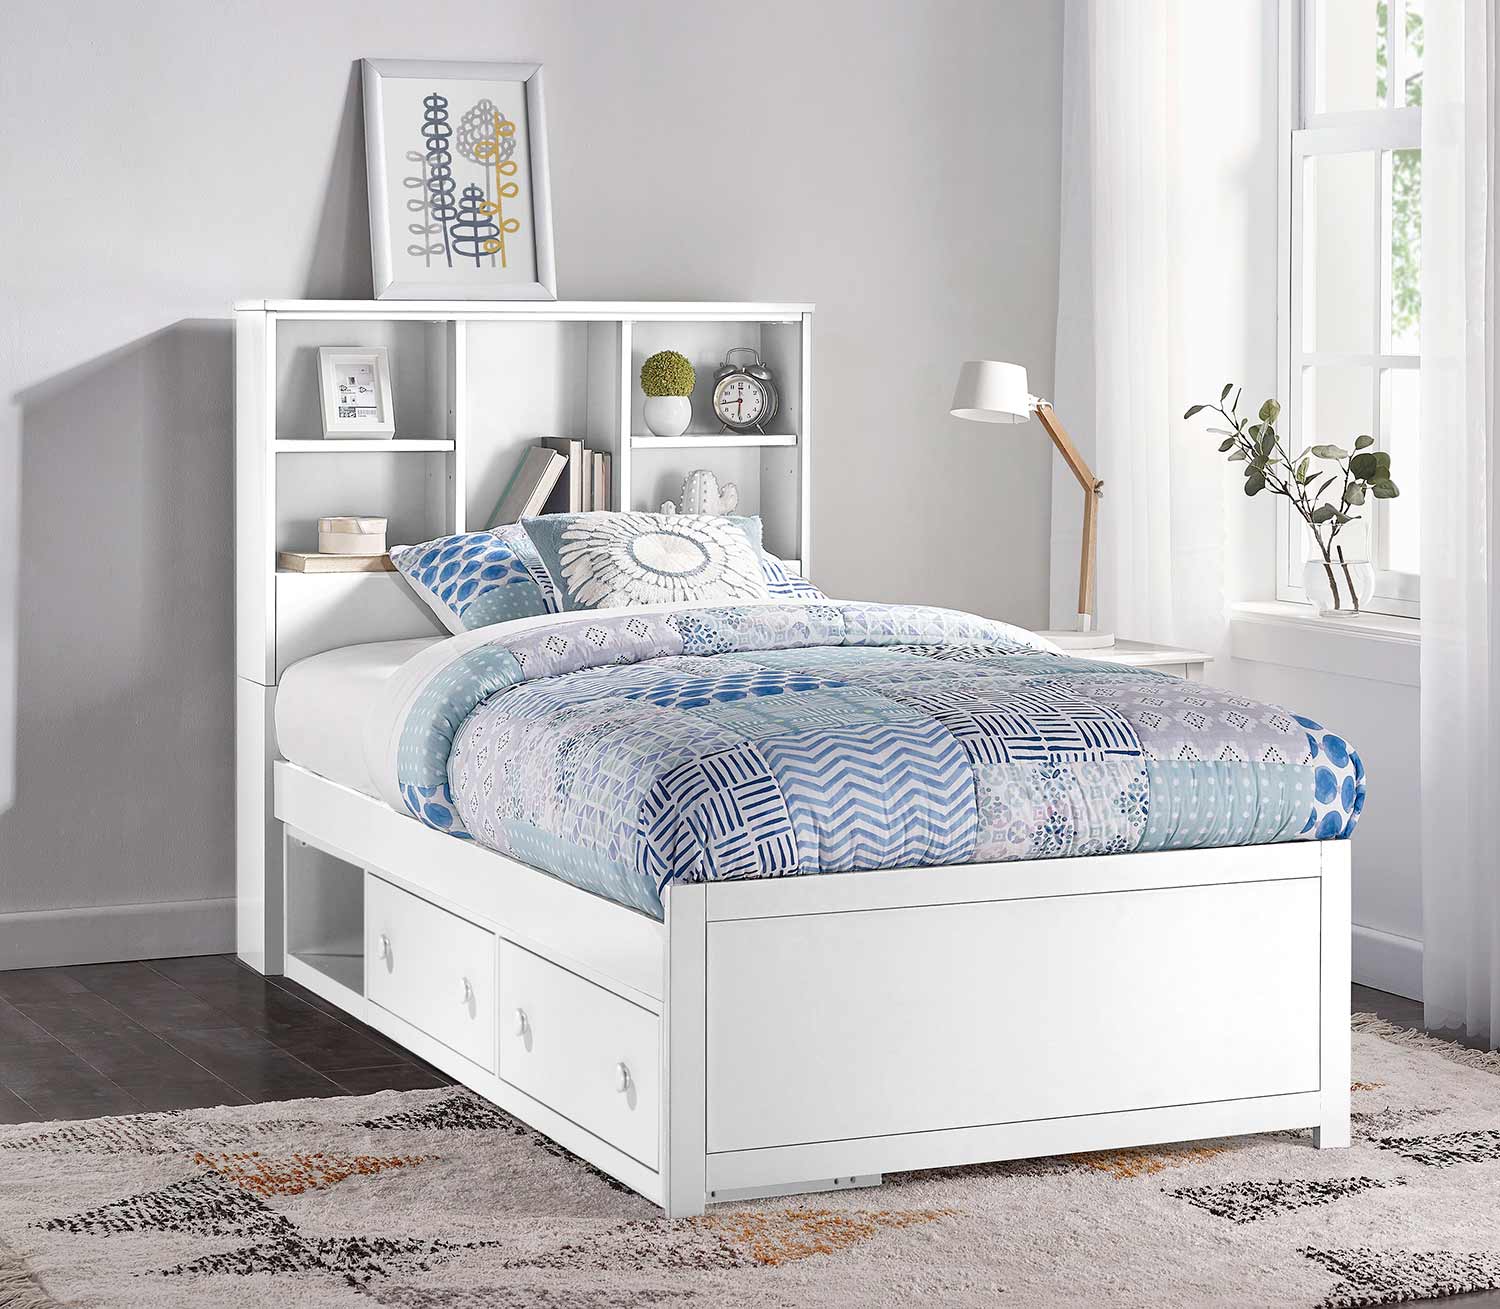 Hillsdale Caspian Twin Bookcase Bed with Storage Unit - White